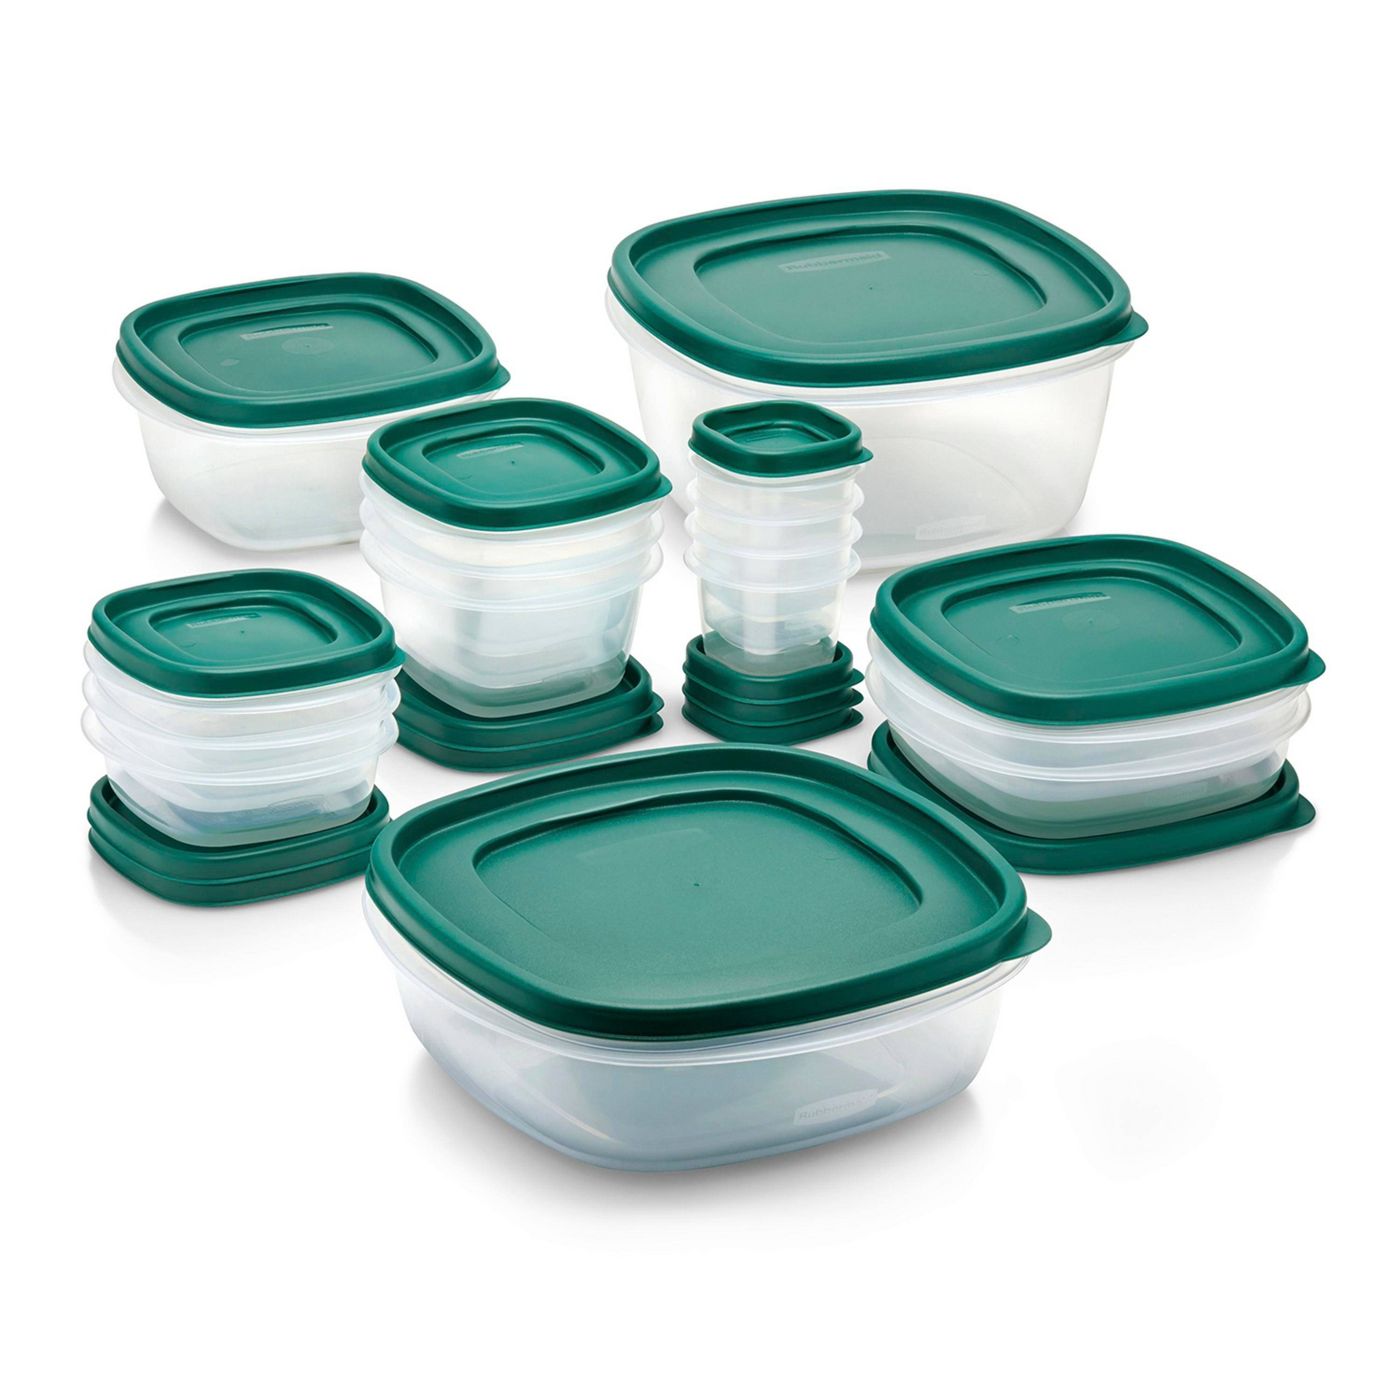 Rubbermaid 30pc Food Storage Container Set with Easy Find Lids Forest Green - image 1 of 9